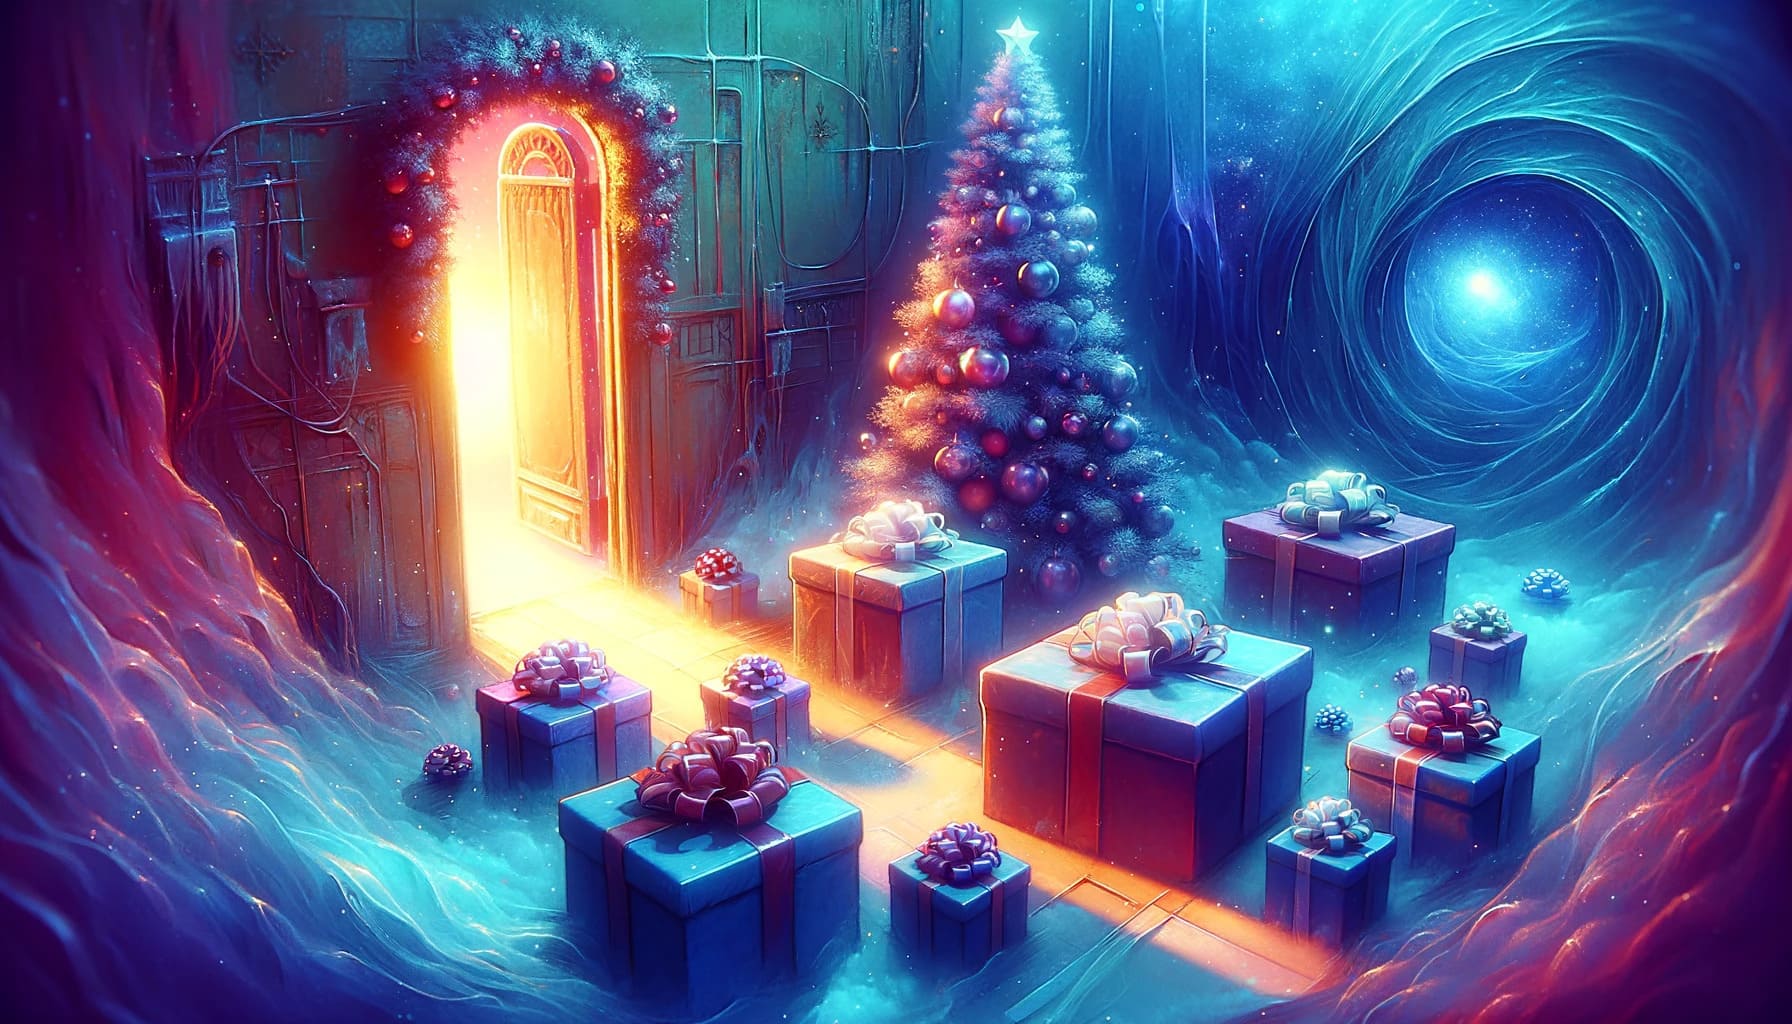 Understanding the Meaning of Christmas Presents in Dreams